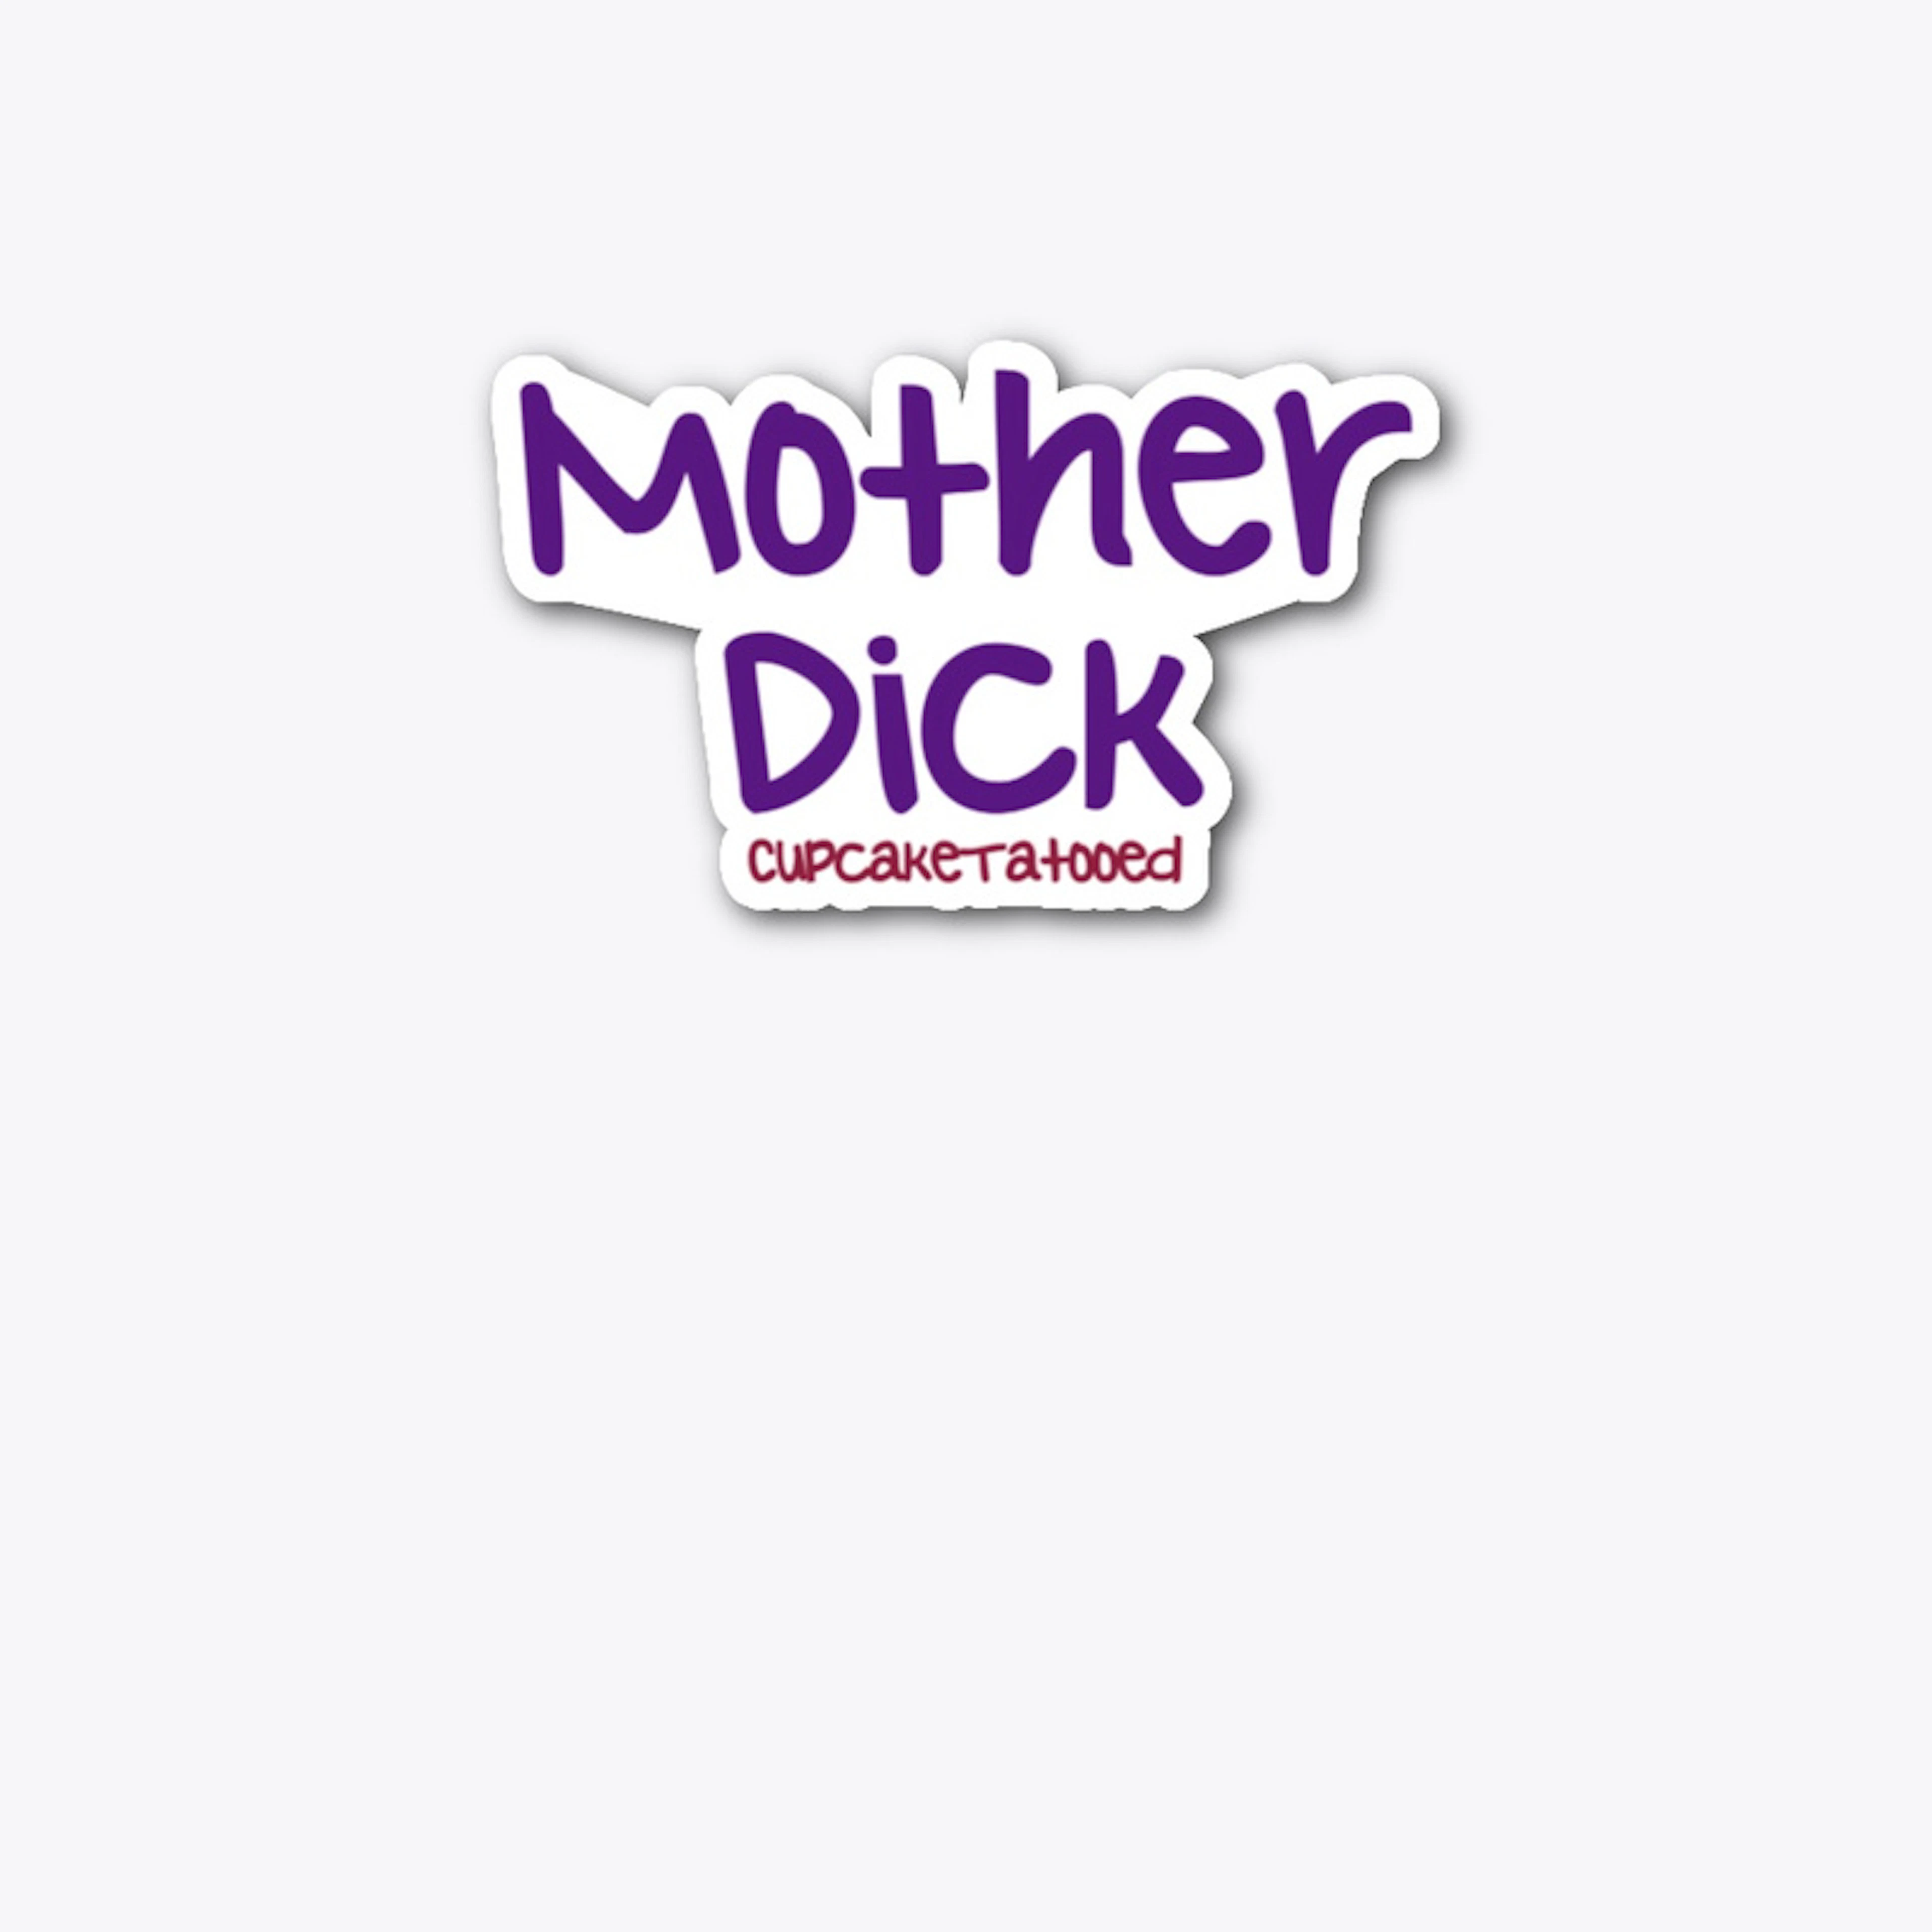 Mother Dick